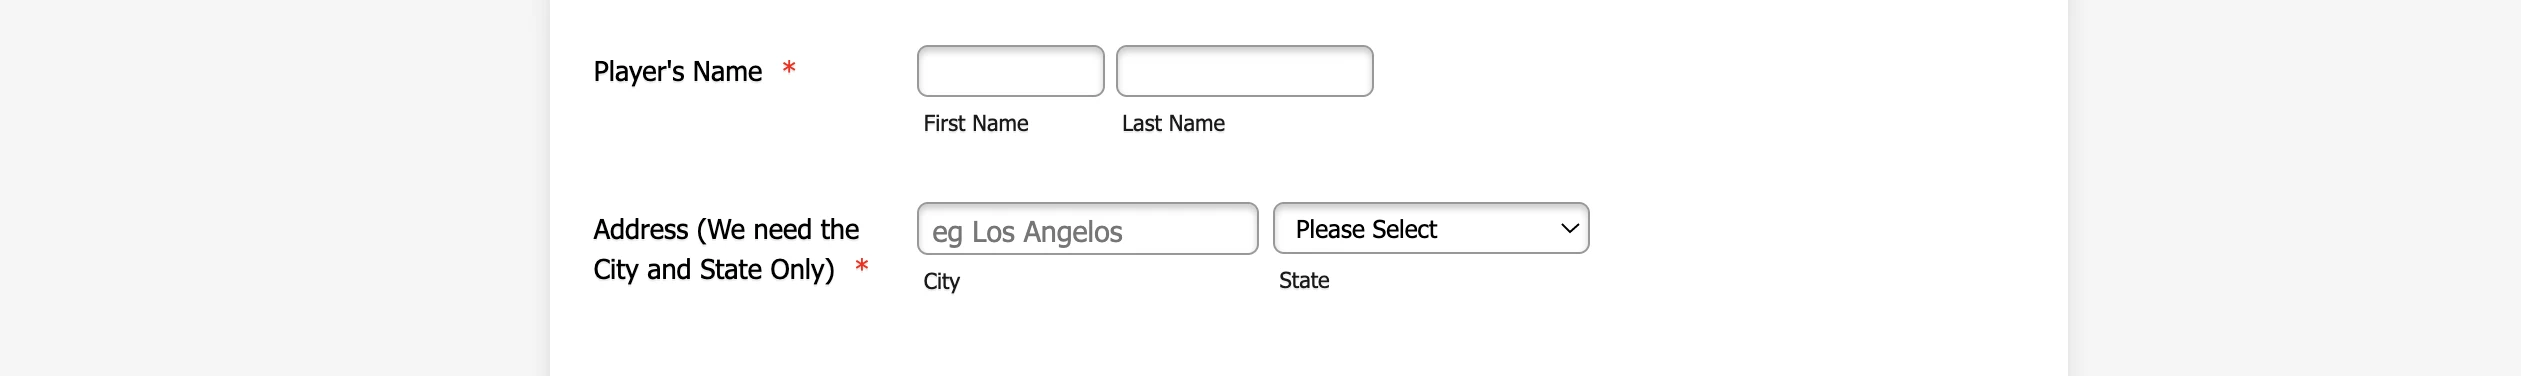 How can I have the form accept the city not the street address? Image 2 Screenshot 41